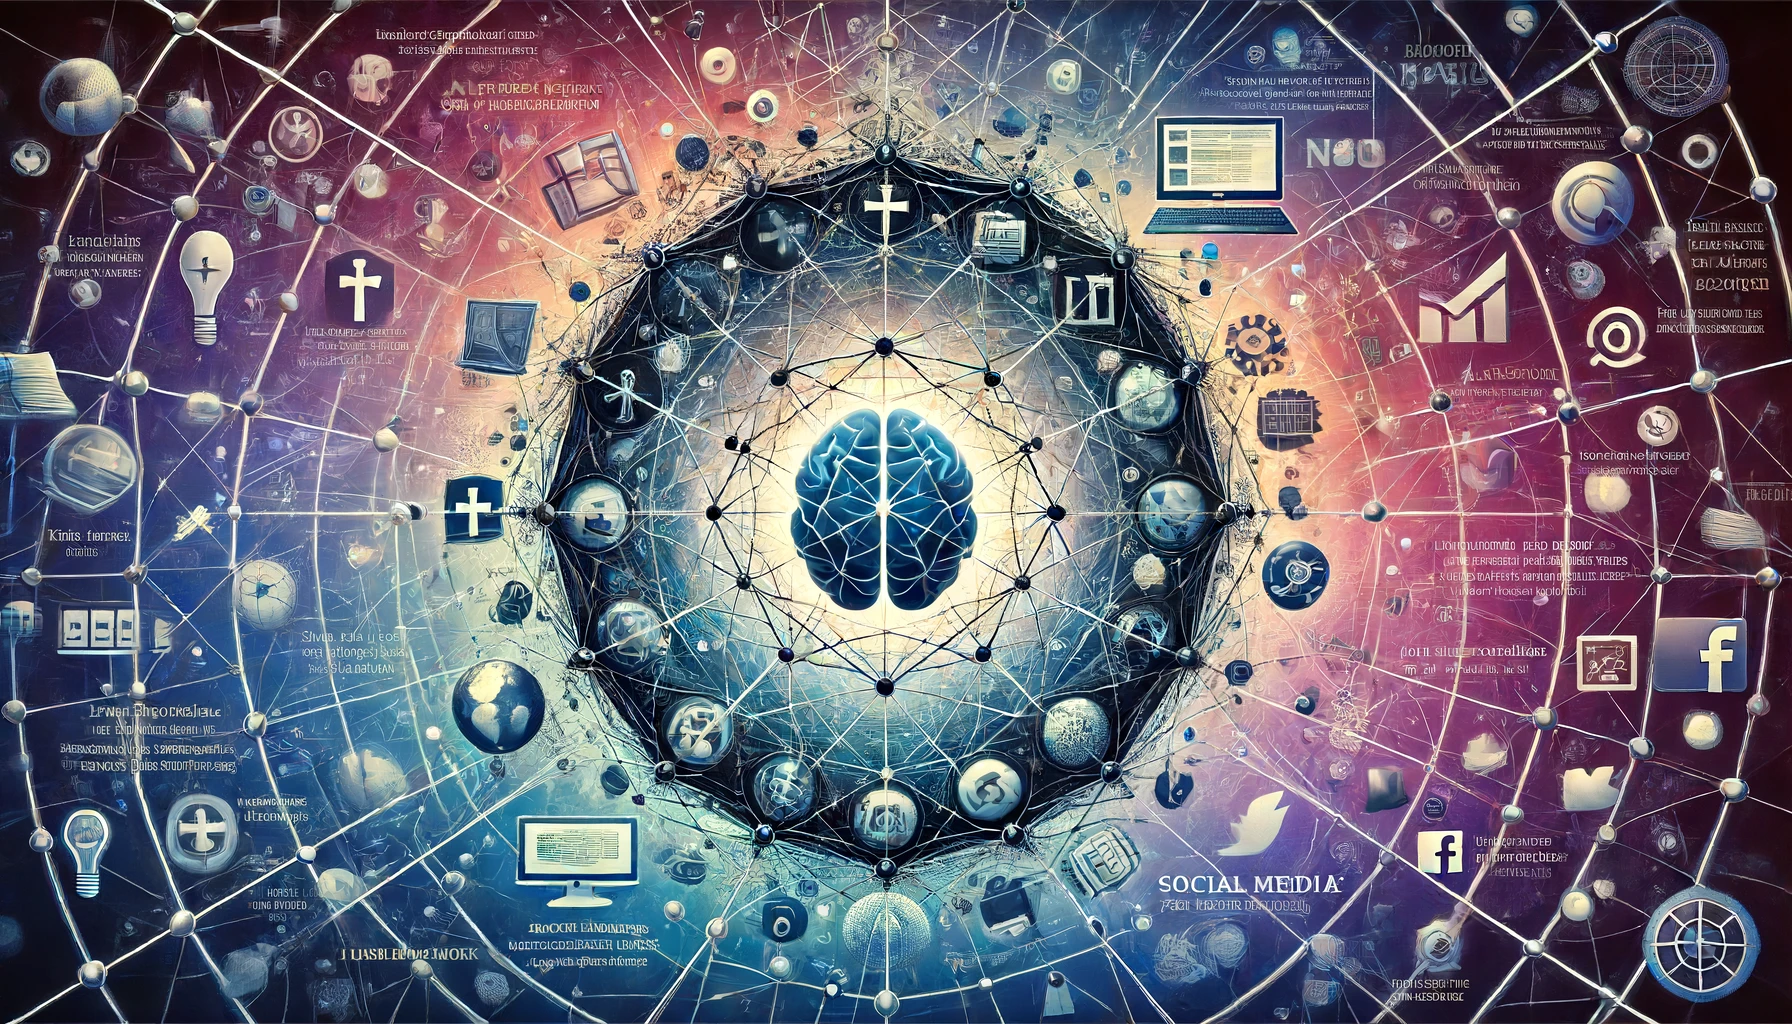 Digital artwork of a brain surrounded by a network of interconnected nodes and icons, including social media and technology symbols.